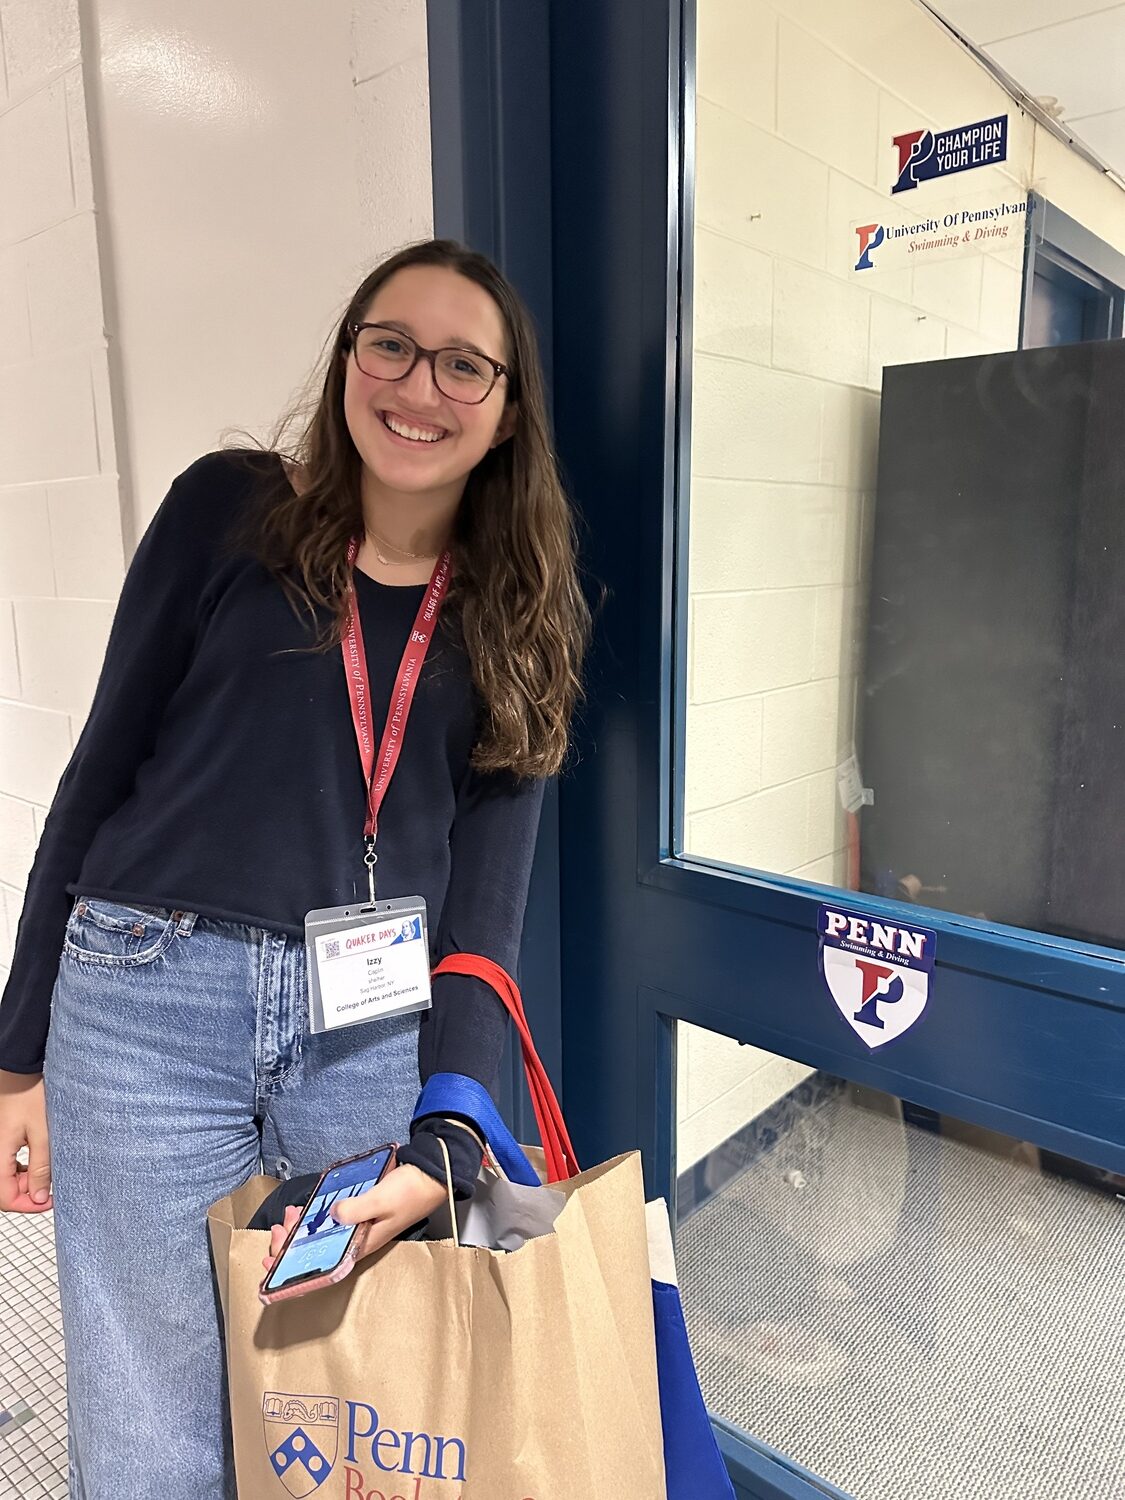 Isabelle Caplin during a visit to the University of Pennsylvania, where she is headed in the fall.